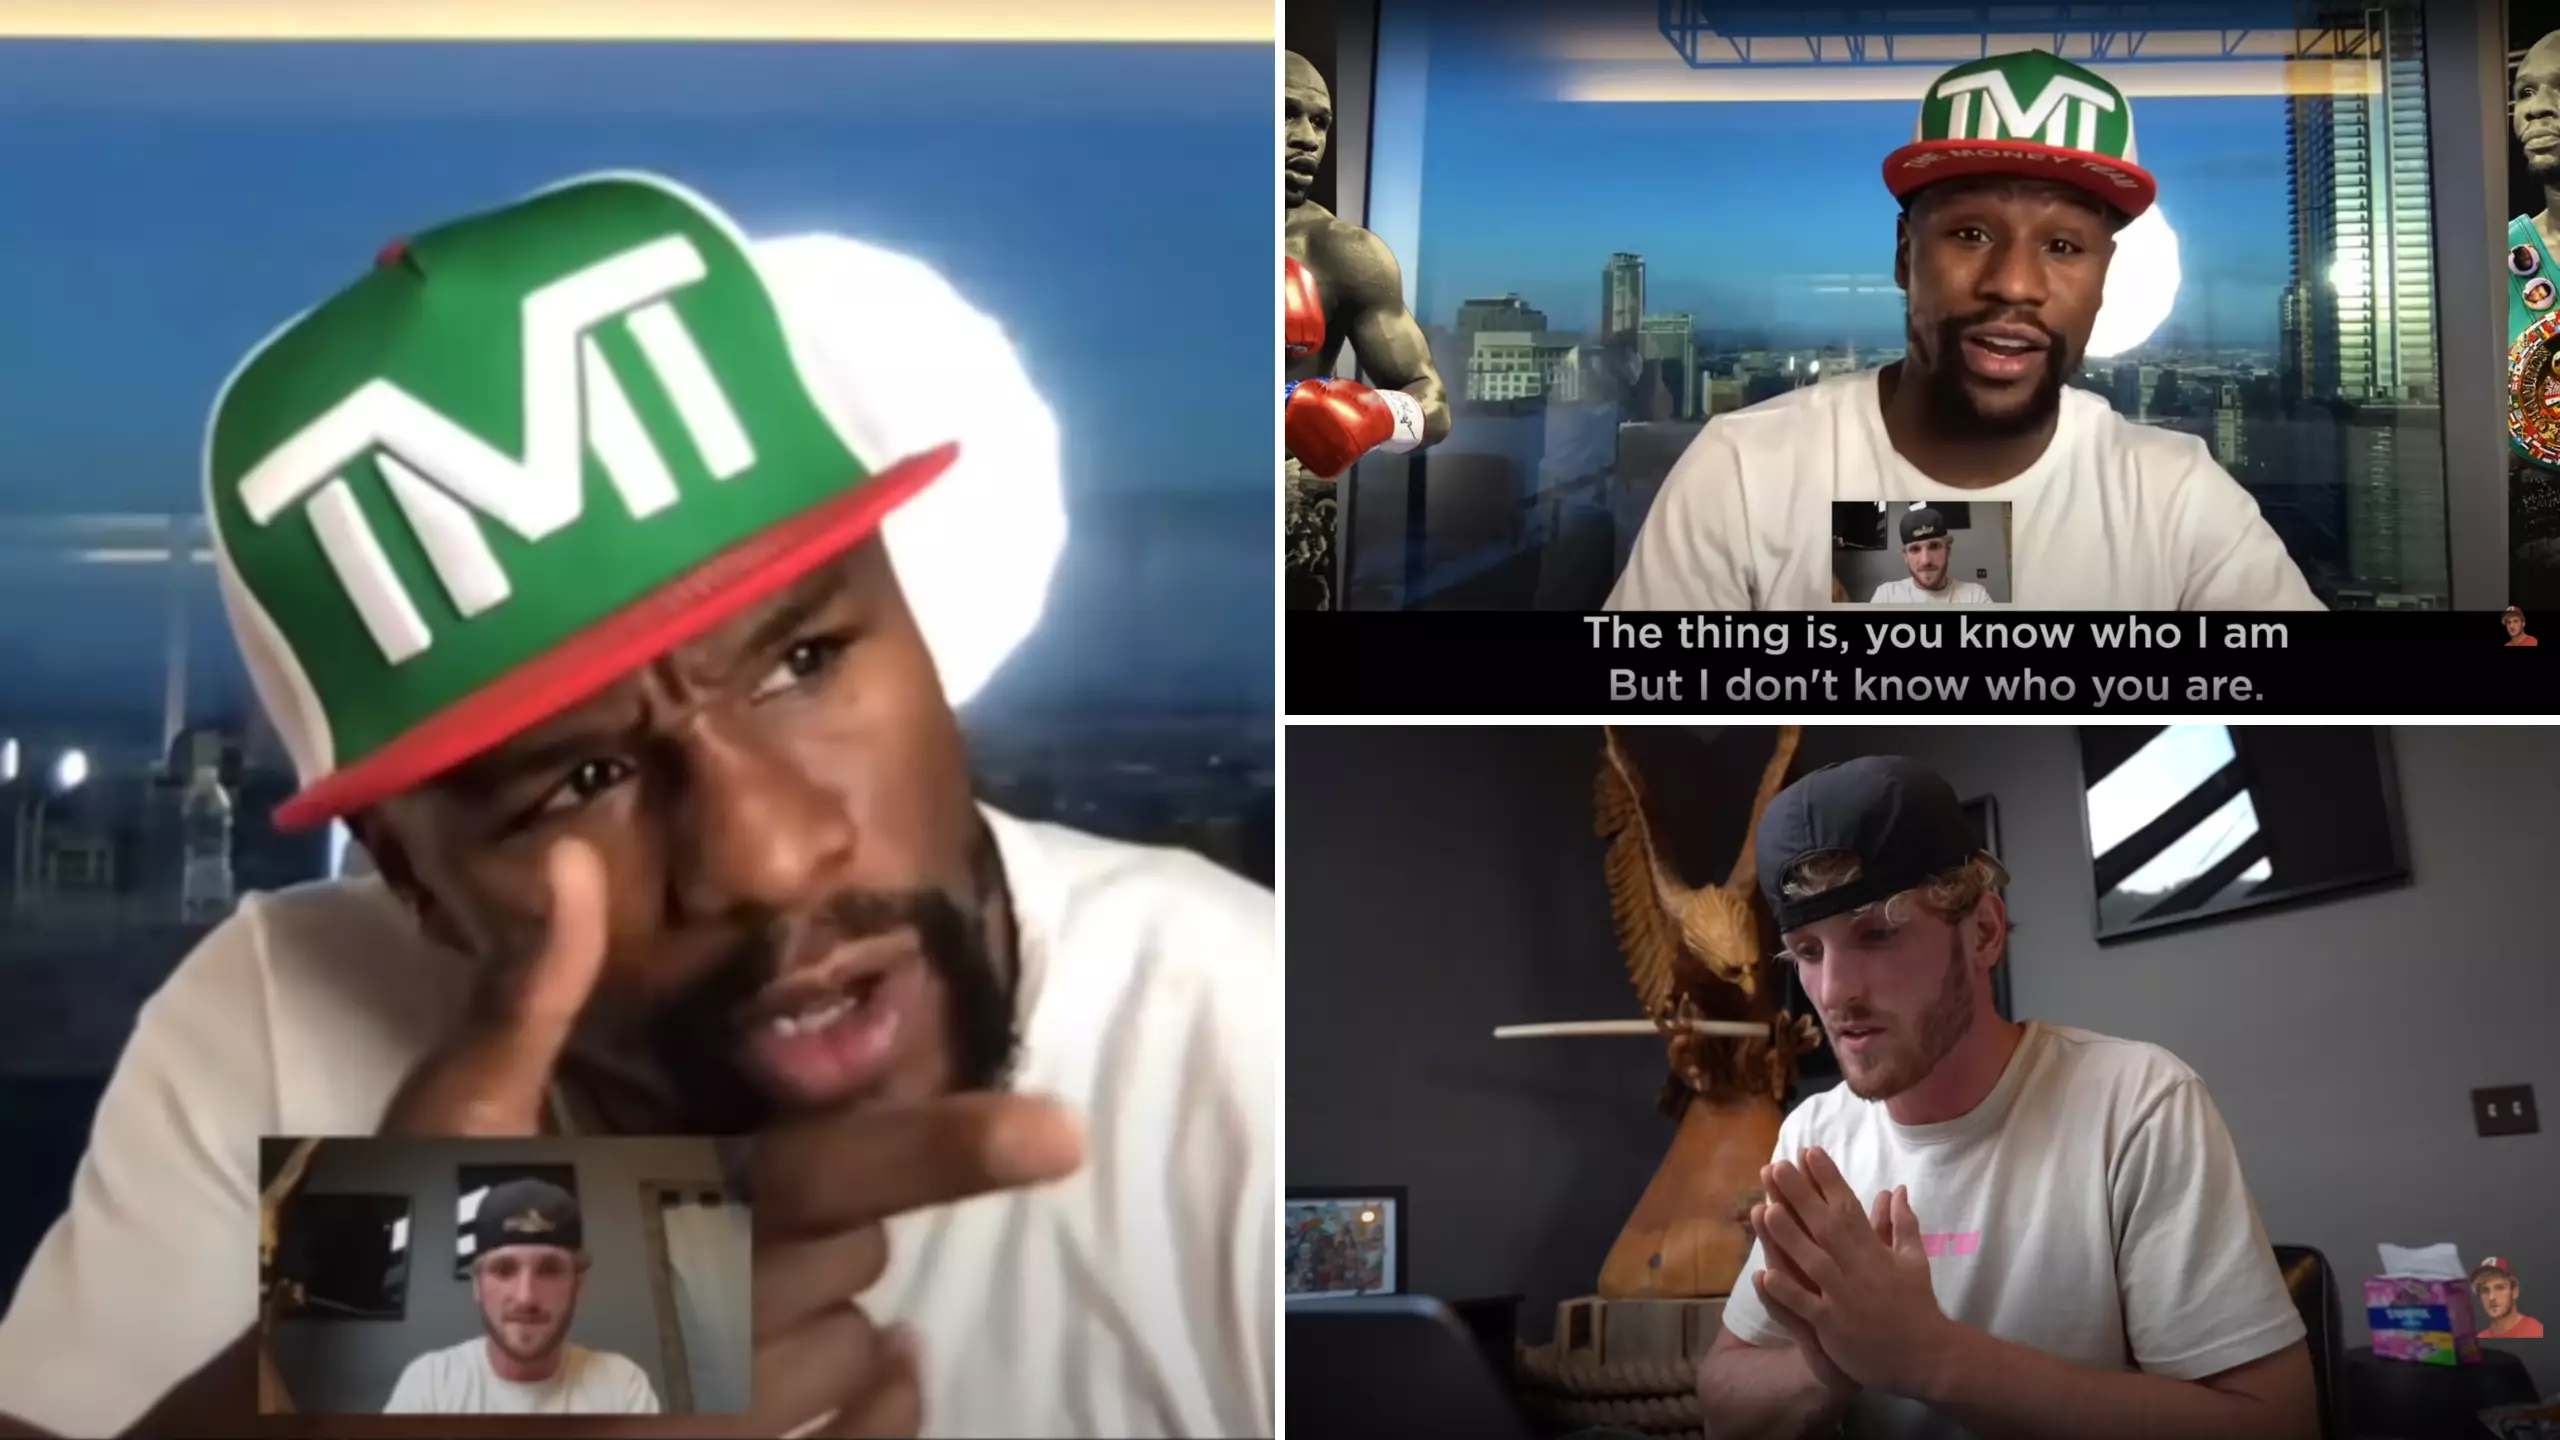 Logan Paul Shares Footage Of FaceTime With Floyd Mayweather That 'Pi**ed' Him Off